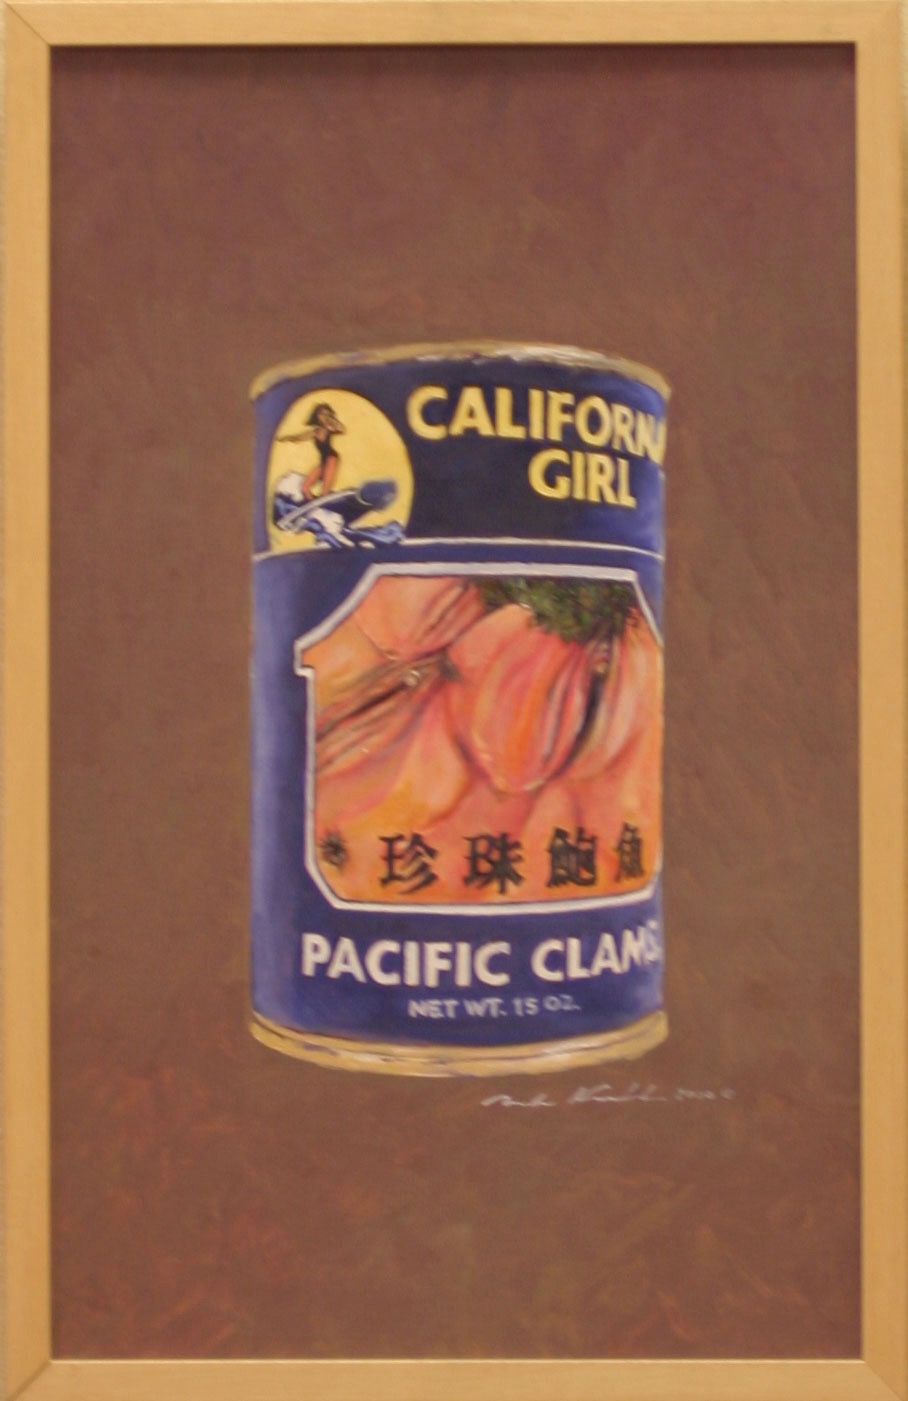 Pacific Clams